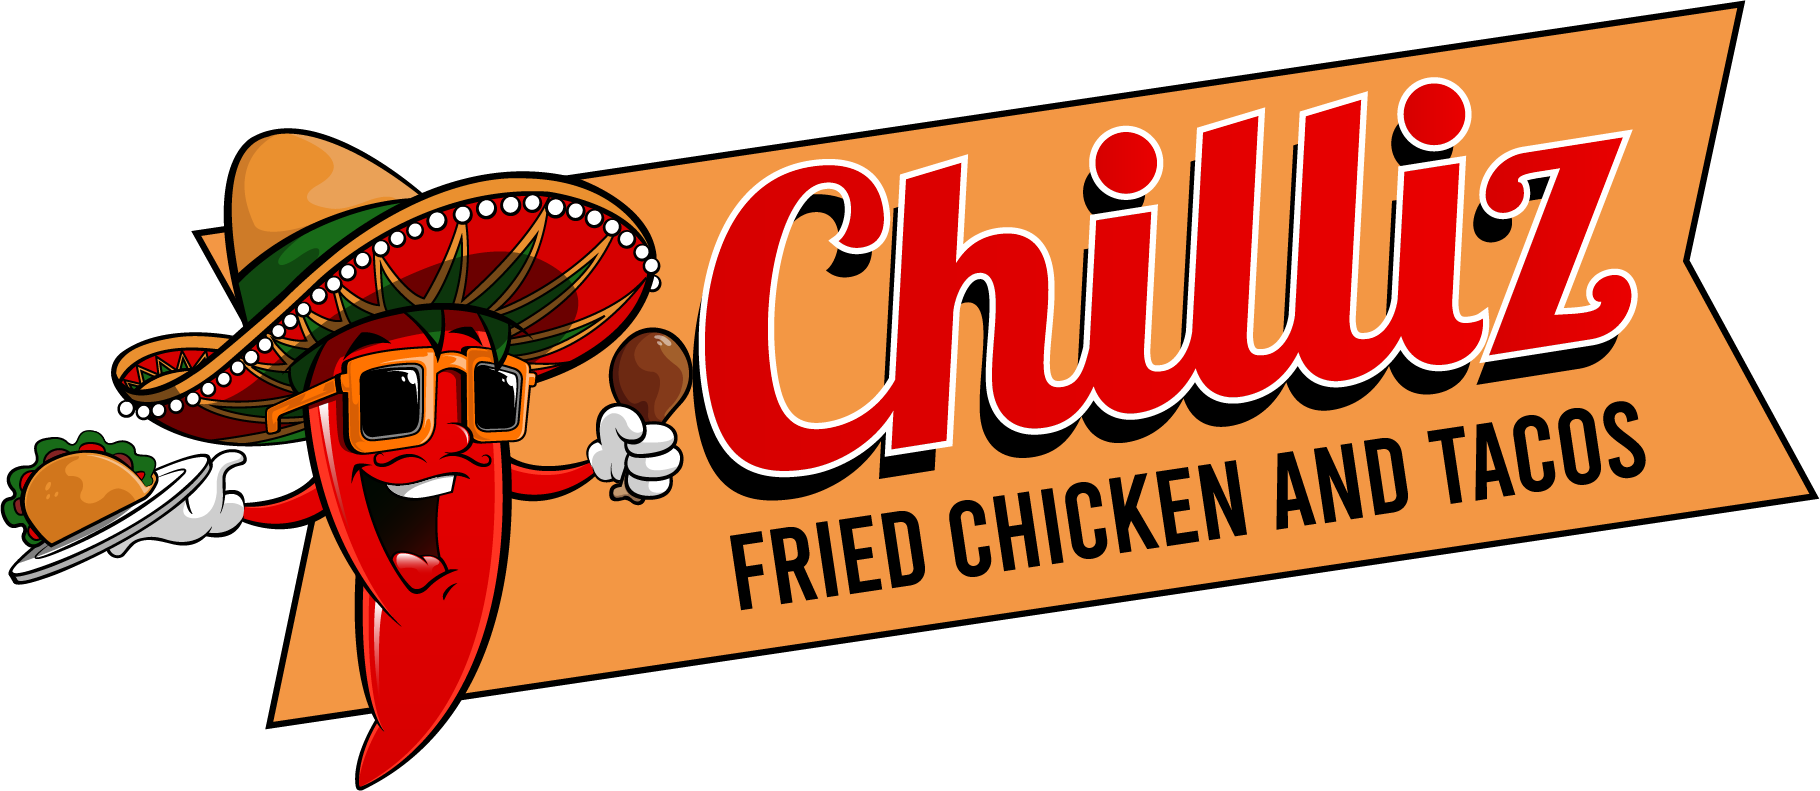 Chilliz Fried Chicken and Taco's